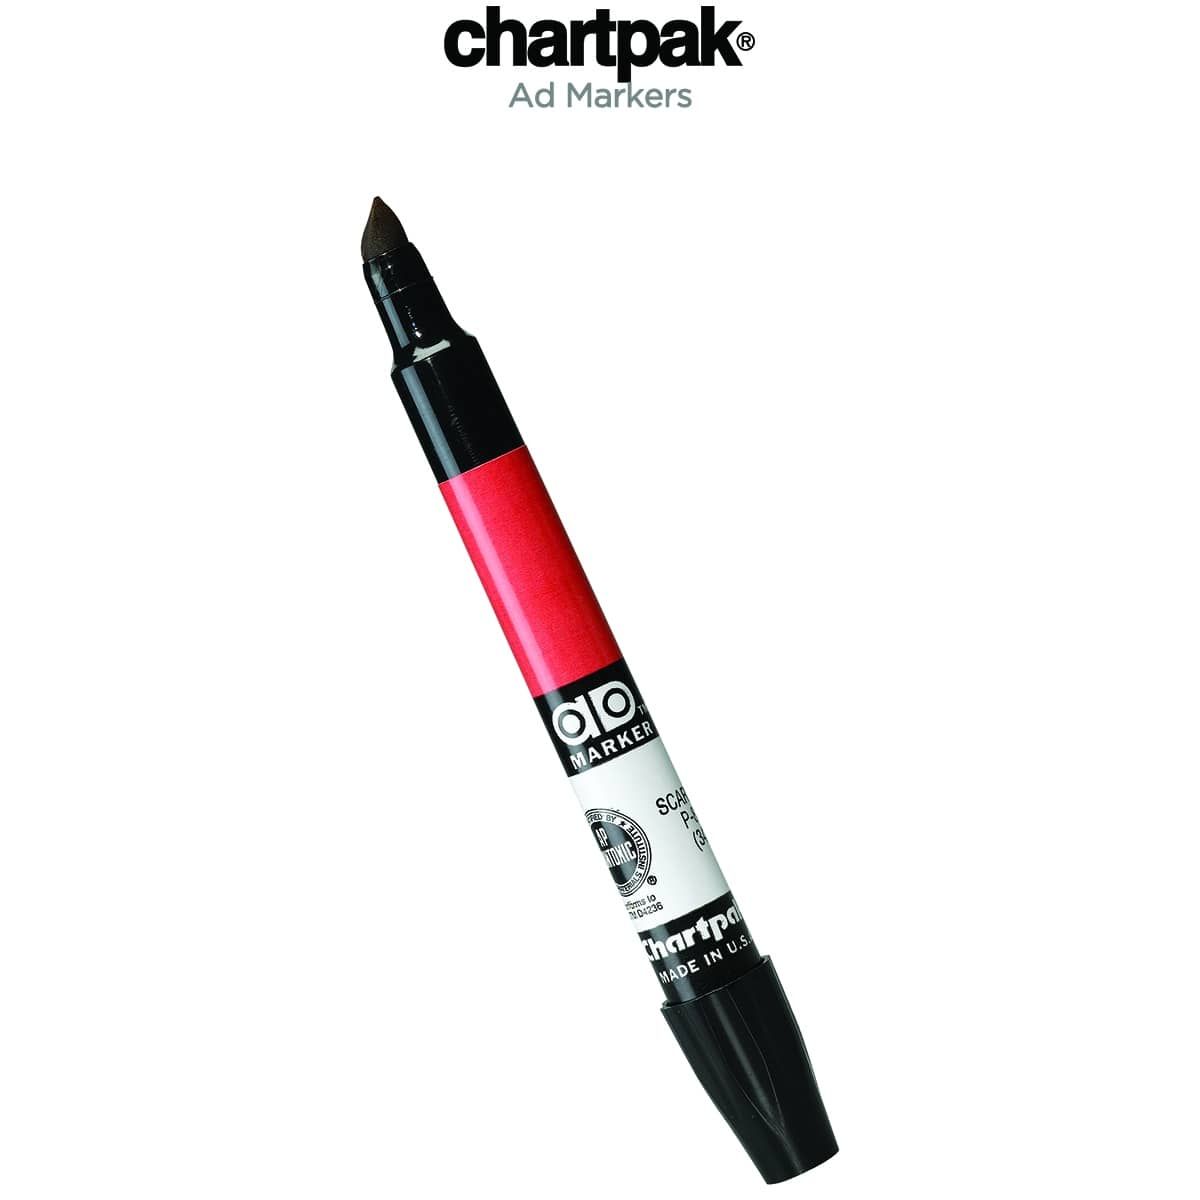 Chartpak Ad Markers - Assorted Colors, Set of 12